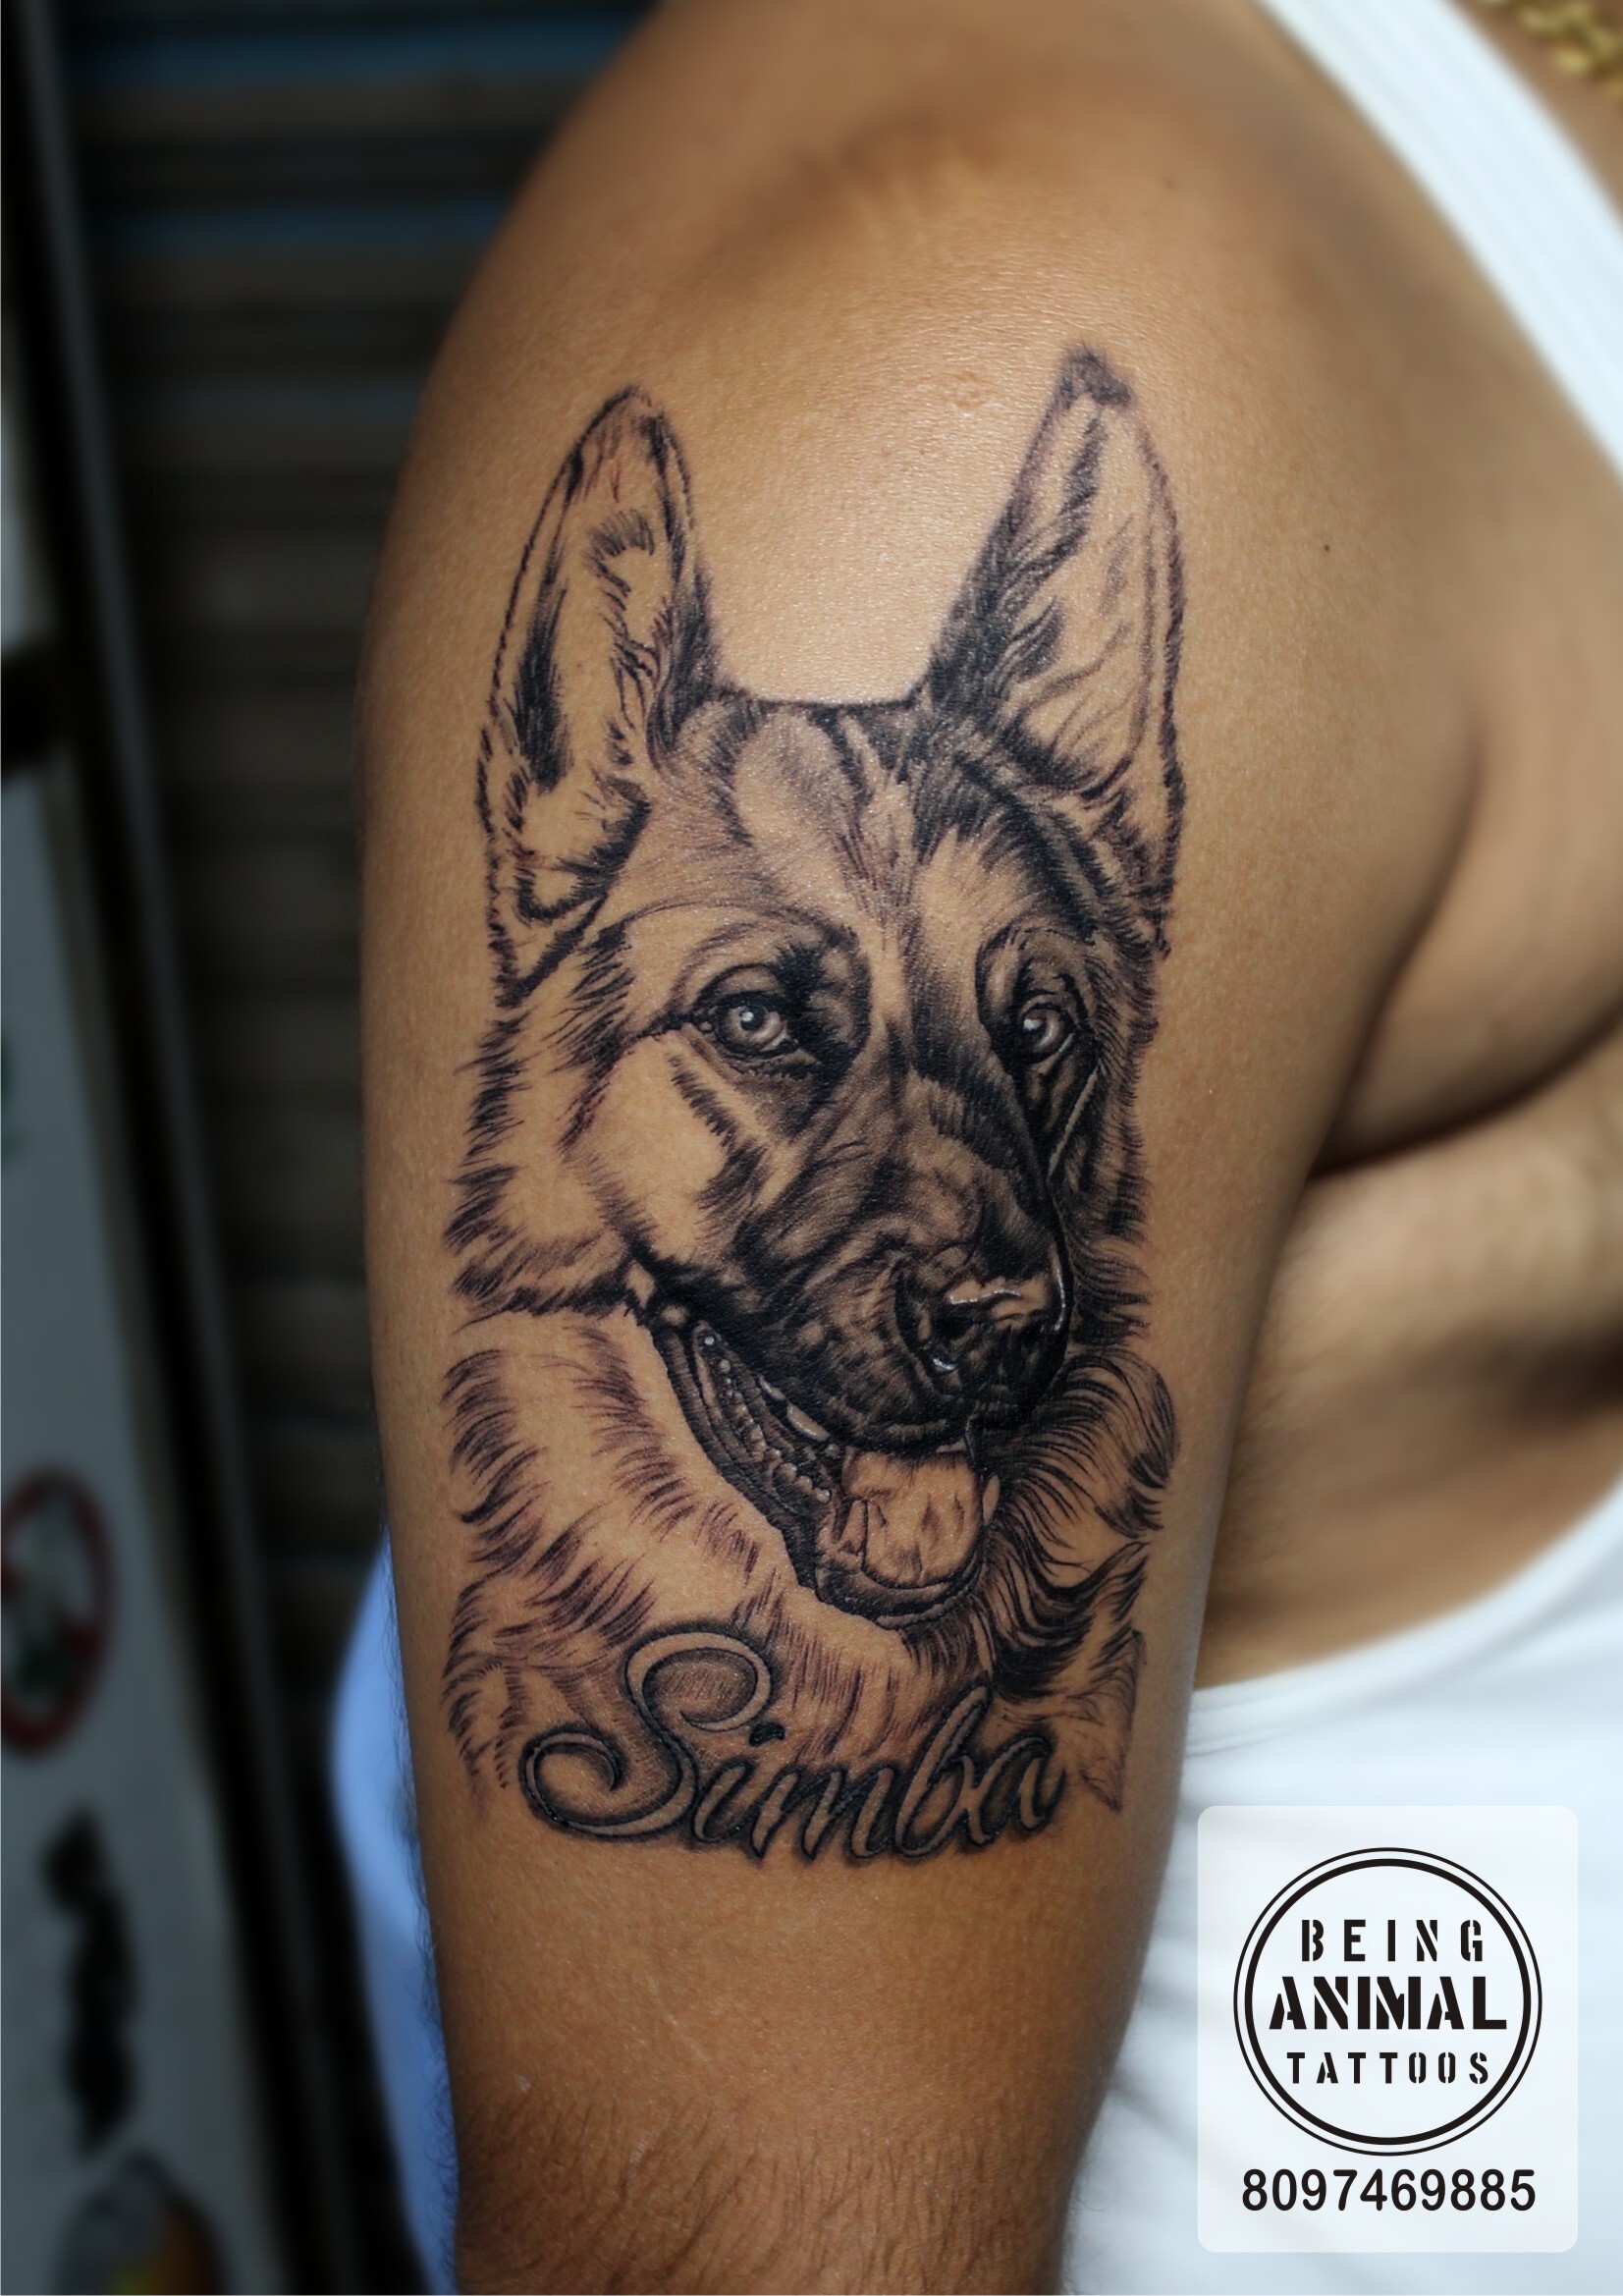 Inkredible Dog Tattoo Ideas For You